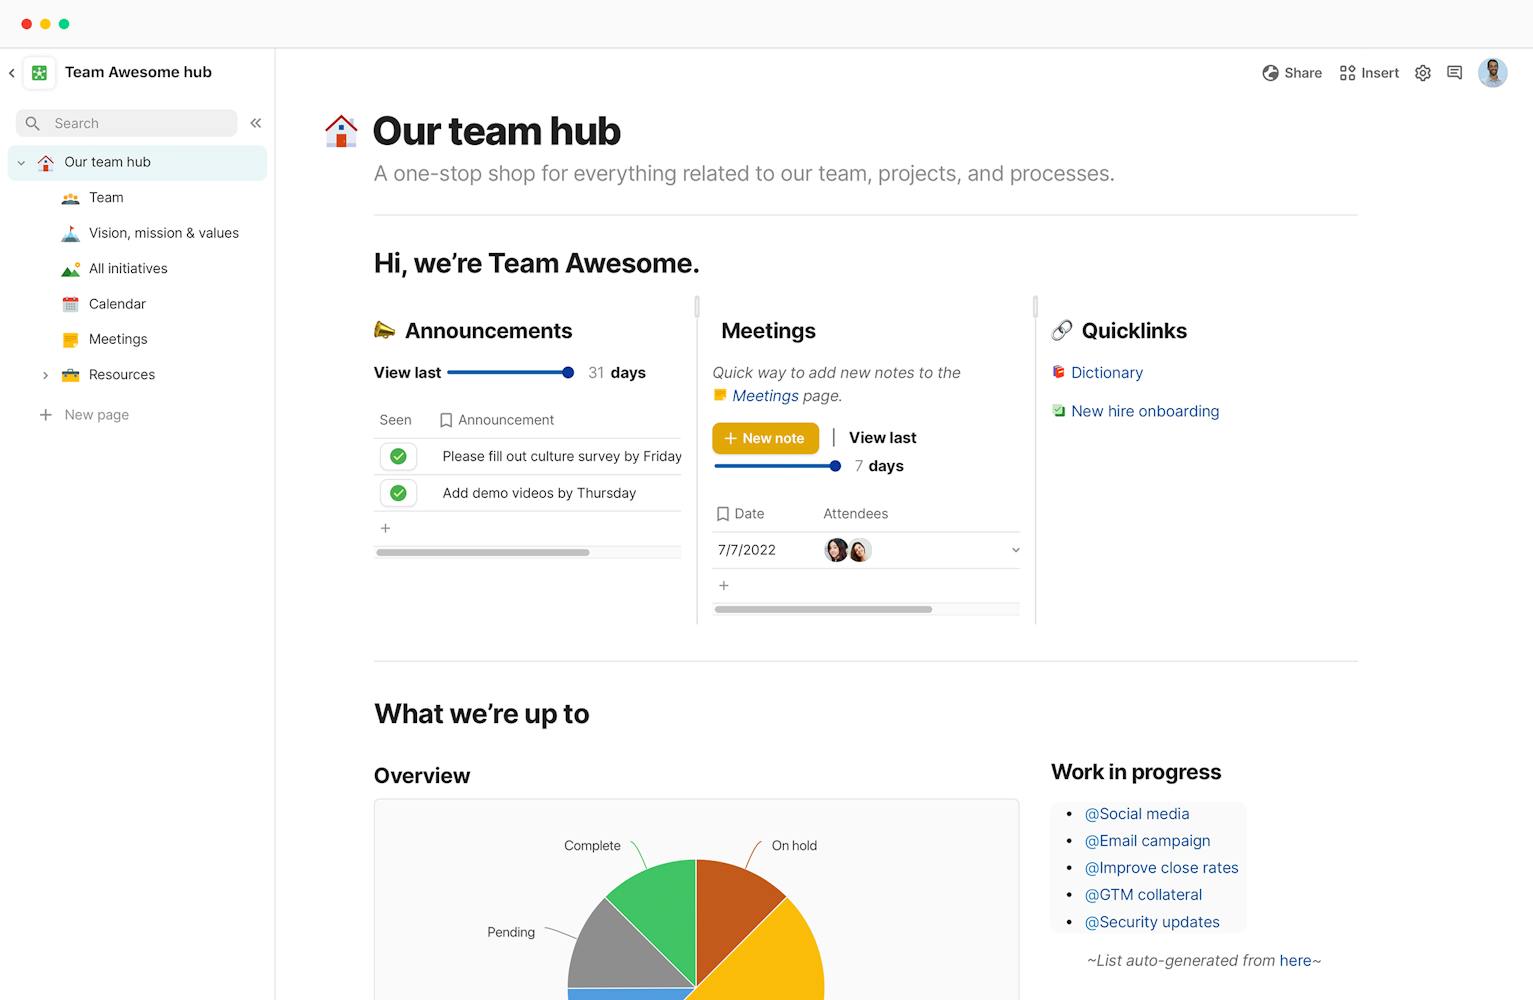 Screenshot of a team hub that showcases updates, meetings, and a pie chart or project statuses